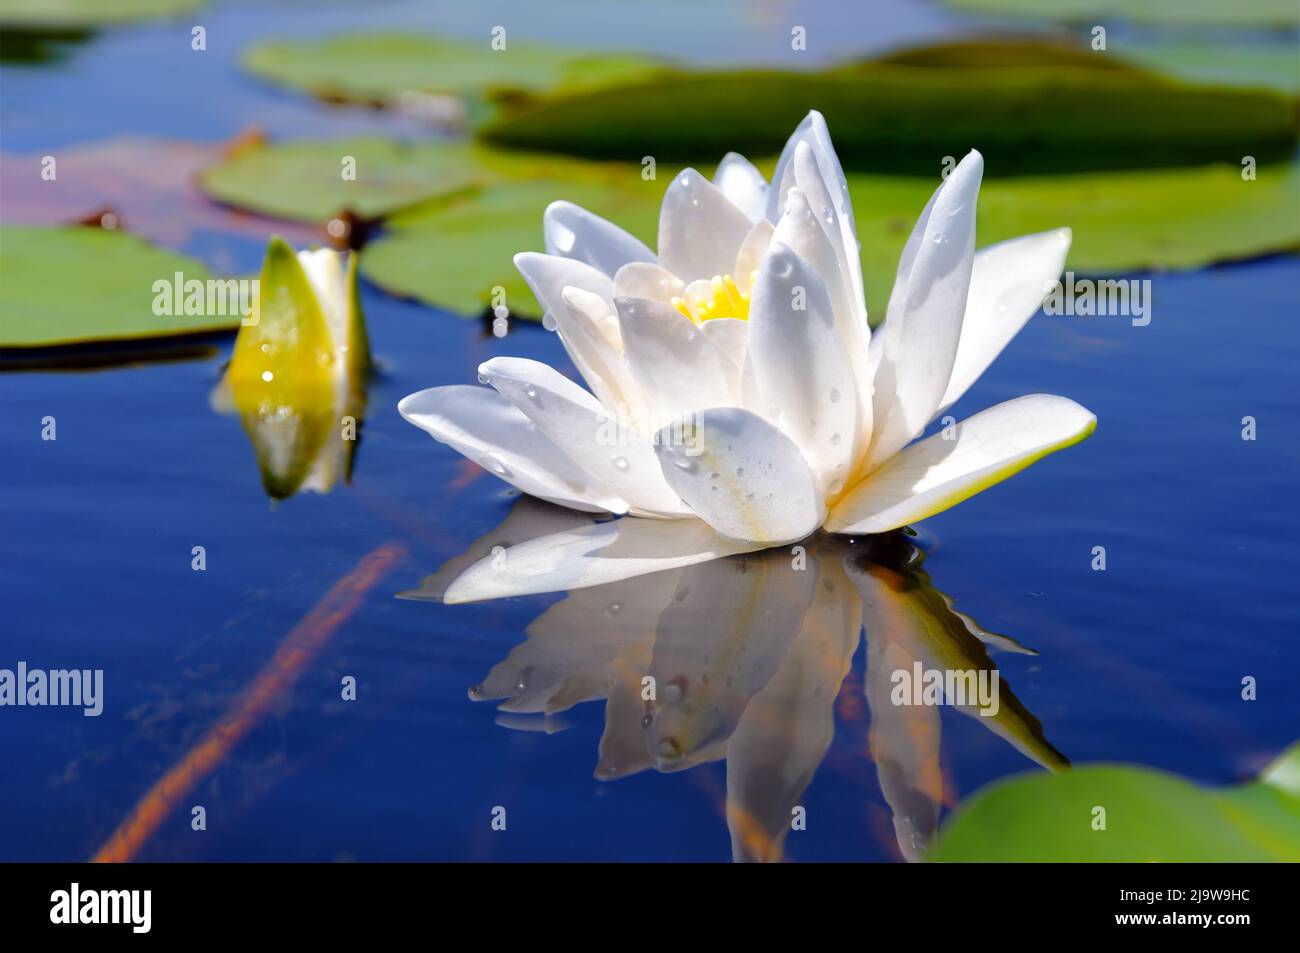 White lily in the blue water of a forest lake against a background of green foliage Stock Photo